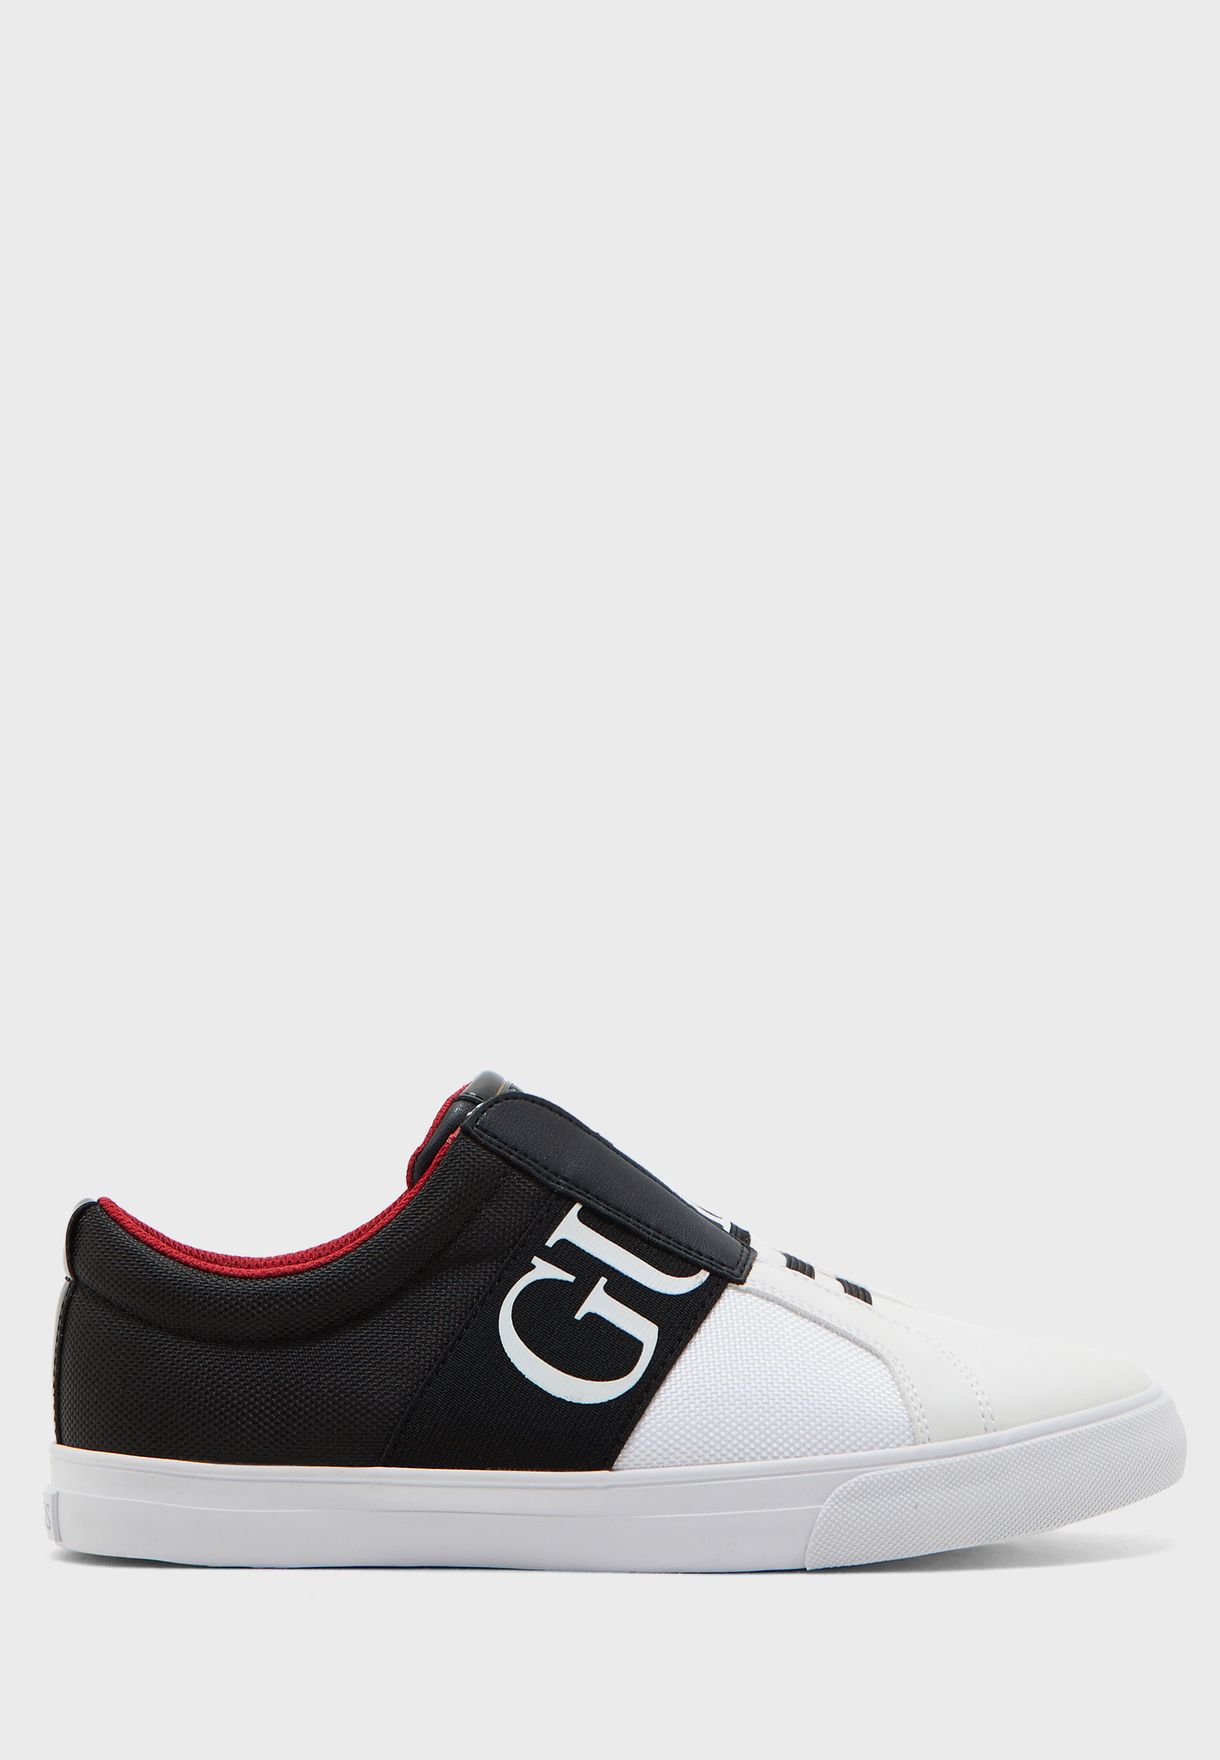 guess black and white shoes